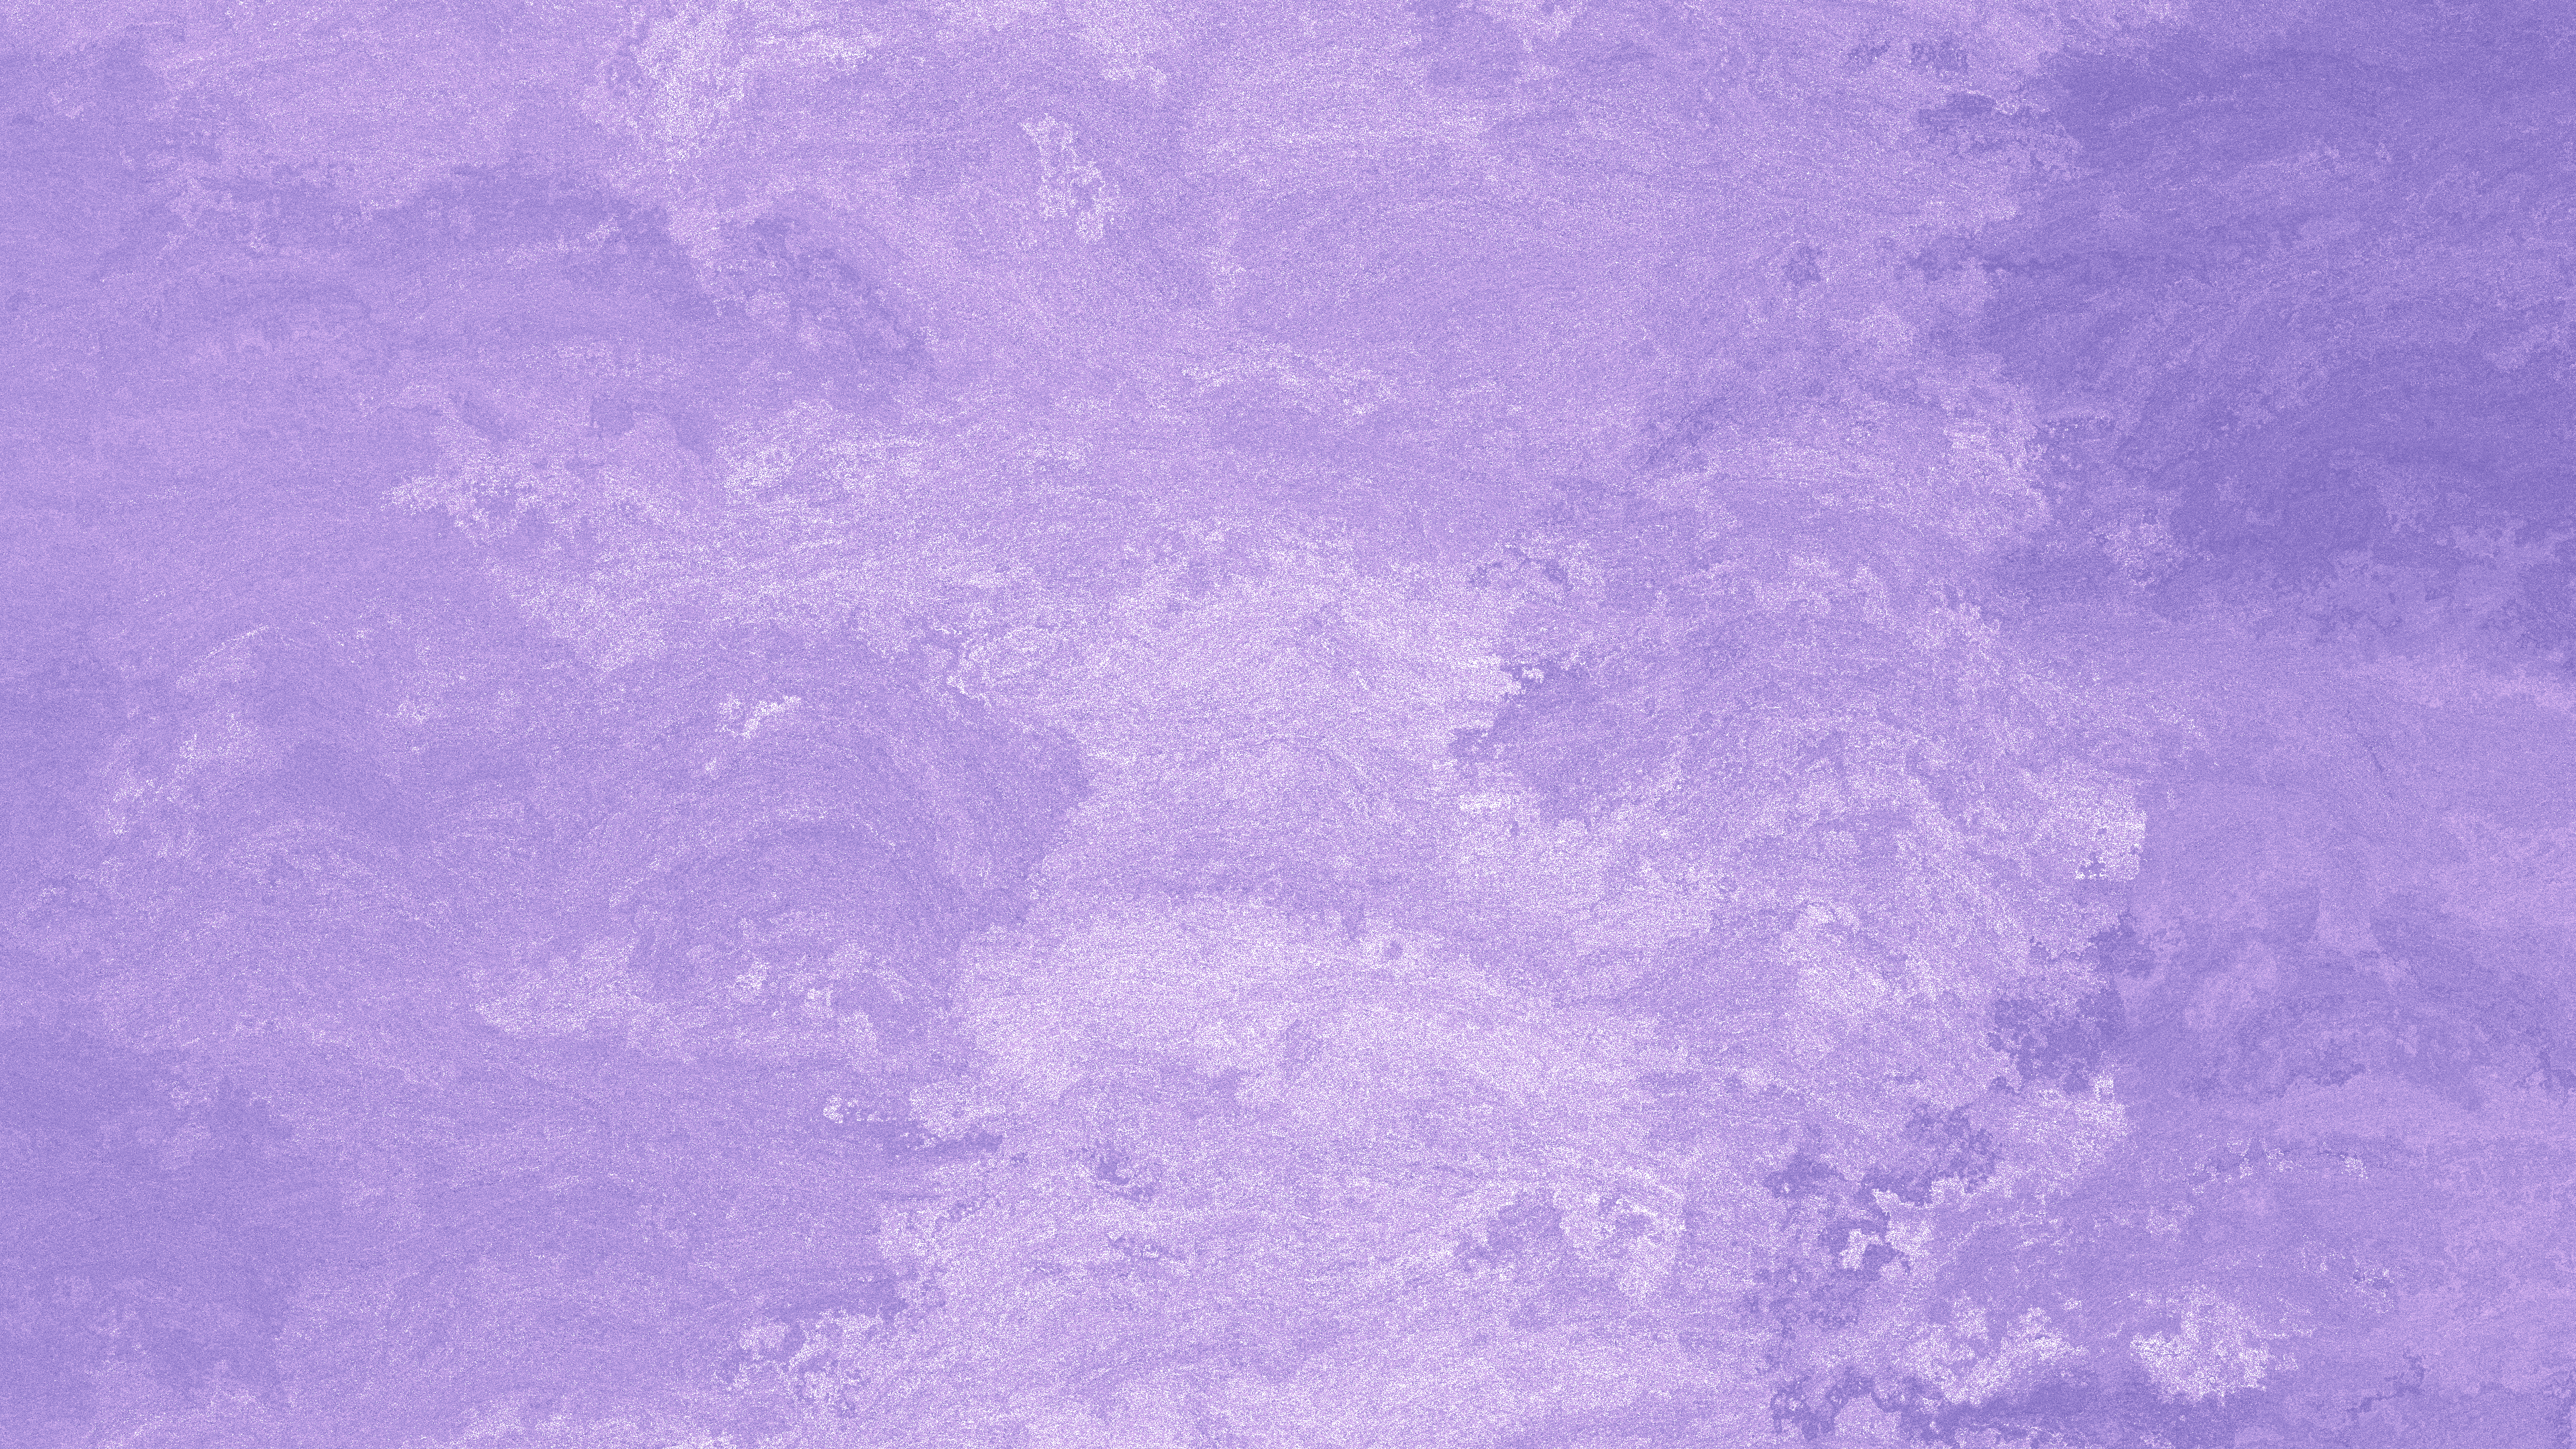 General 3840x2160 abstract bright purple background texture